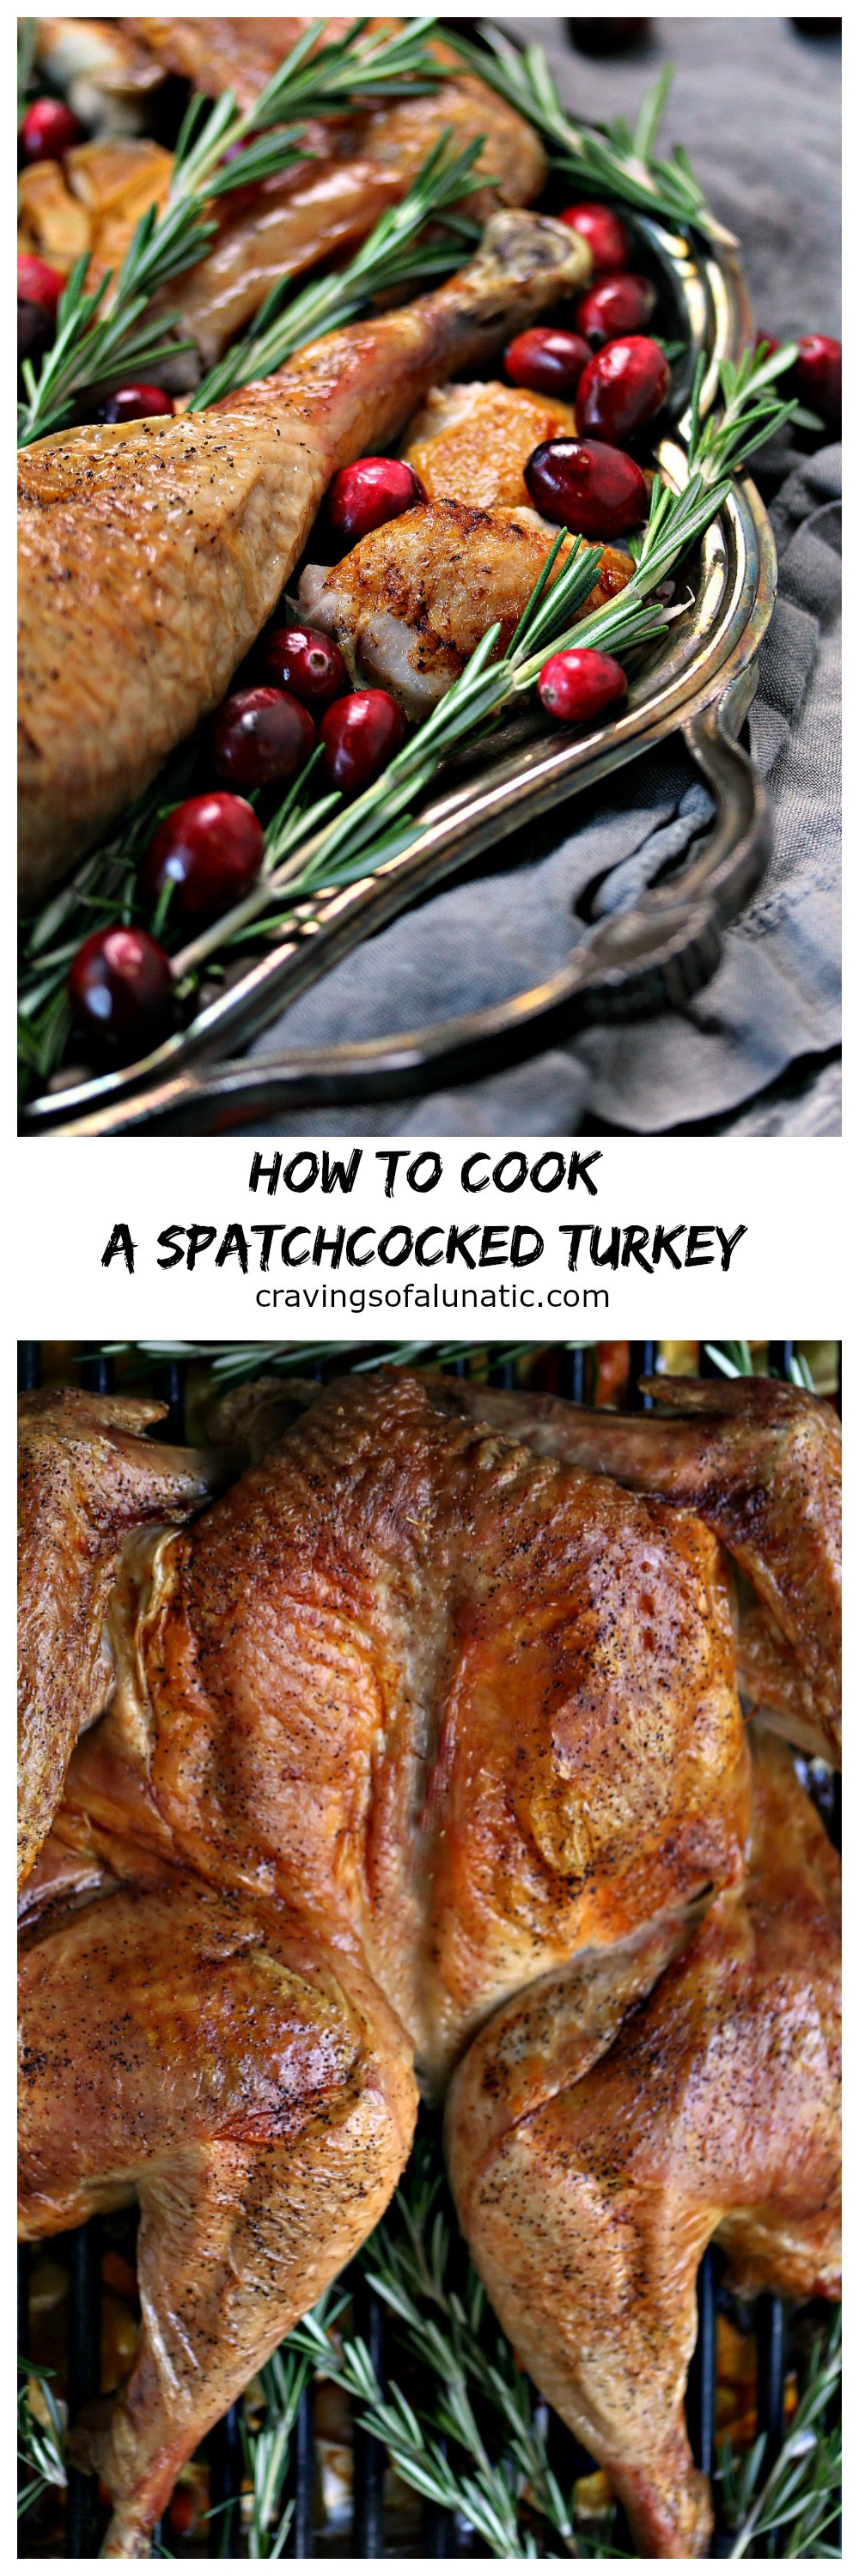 How To Cook A Thanksgiving Turkey
 How to Cook a Spatchcocked Turkey